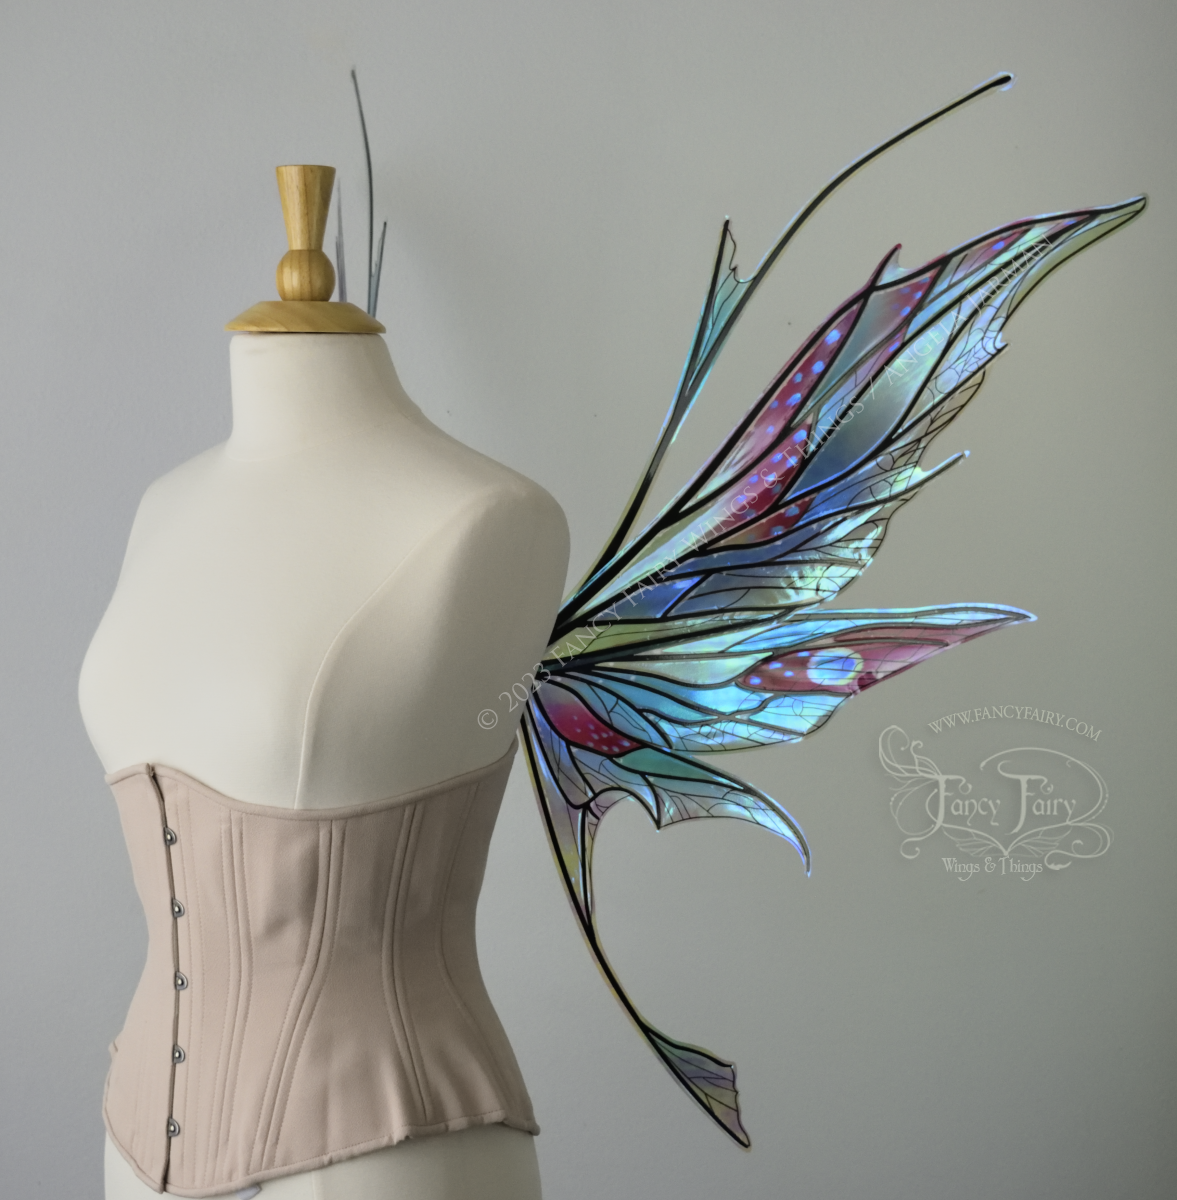 Right side view of a dress form wearing an underbust corset & large blue / burgundy / green painted iridescent fairy wings with antennae, black veins, spikey shapes